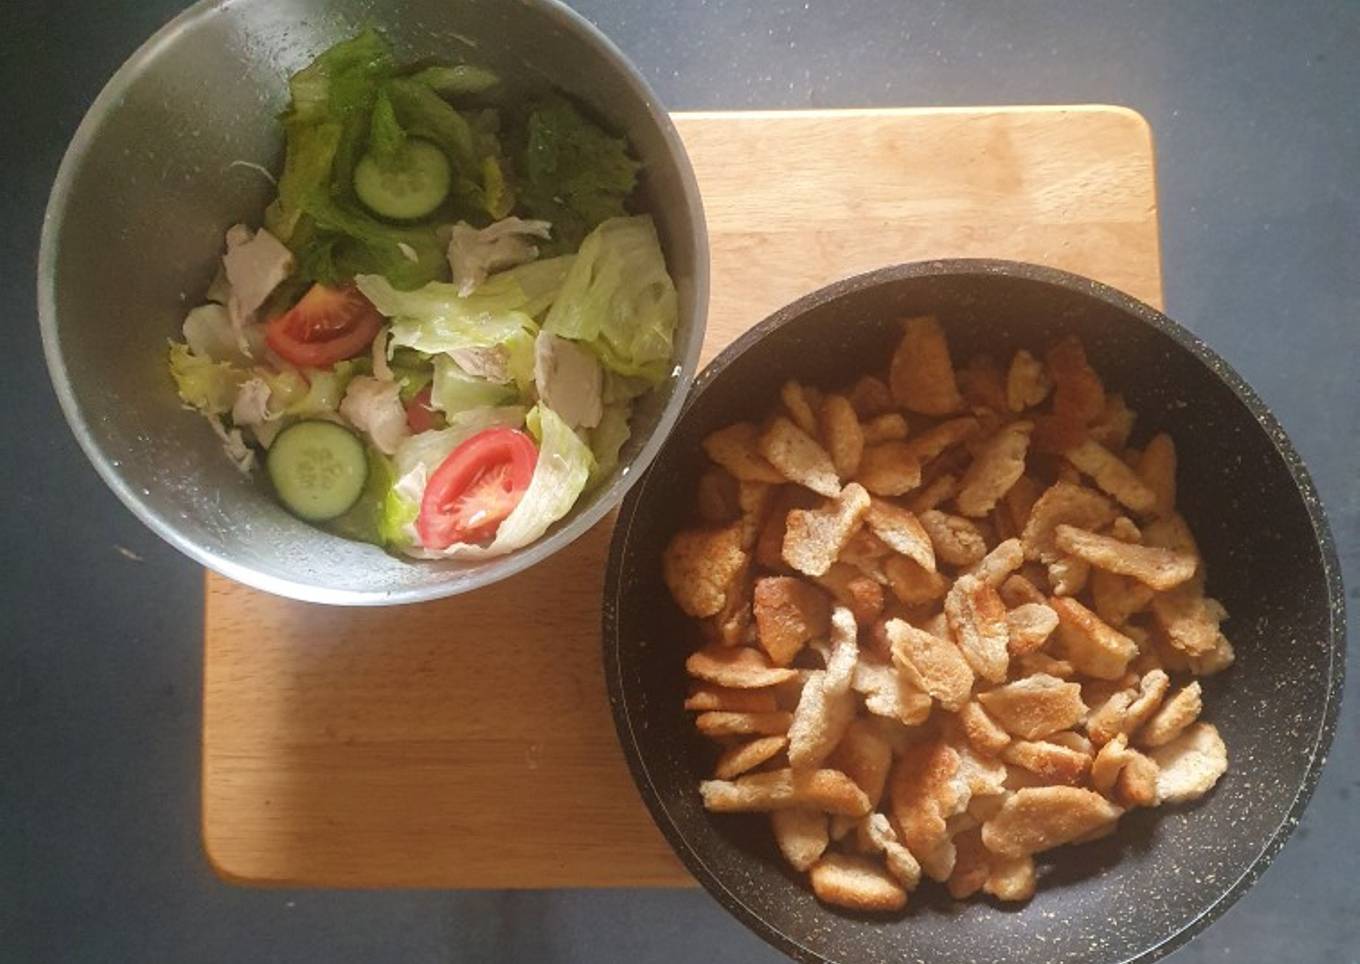 Lime dressed Chicken Salad with Croutons